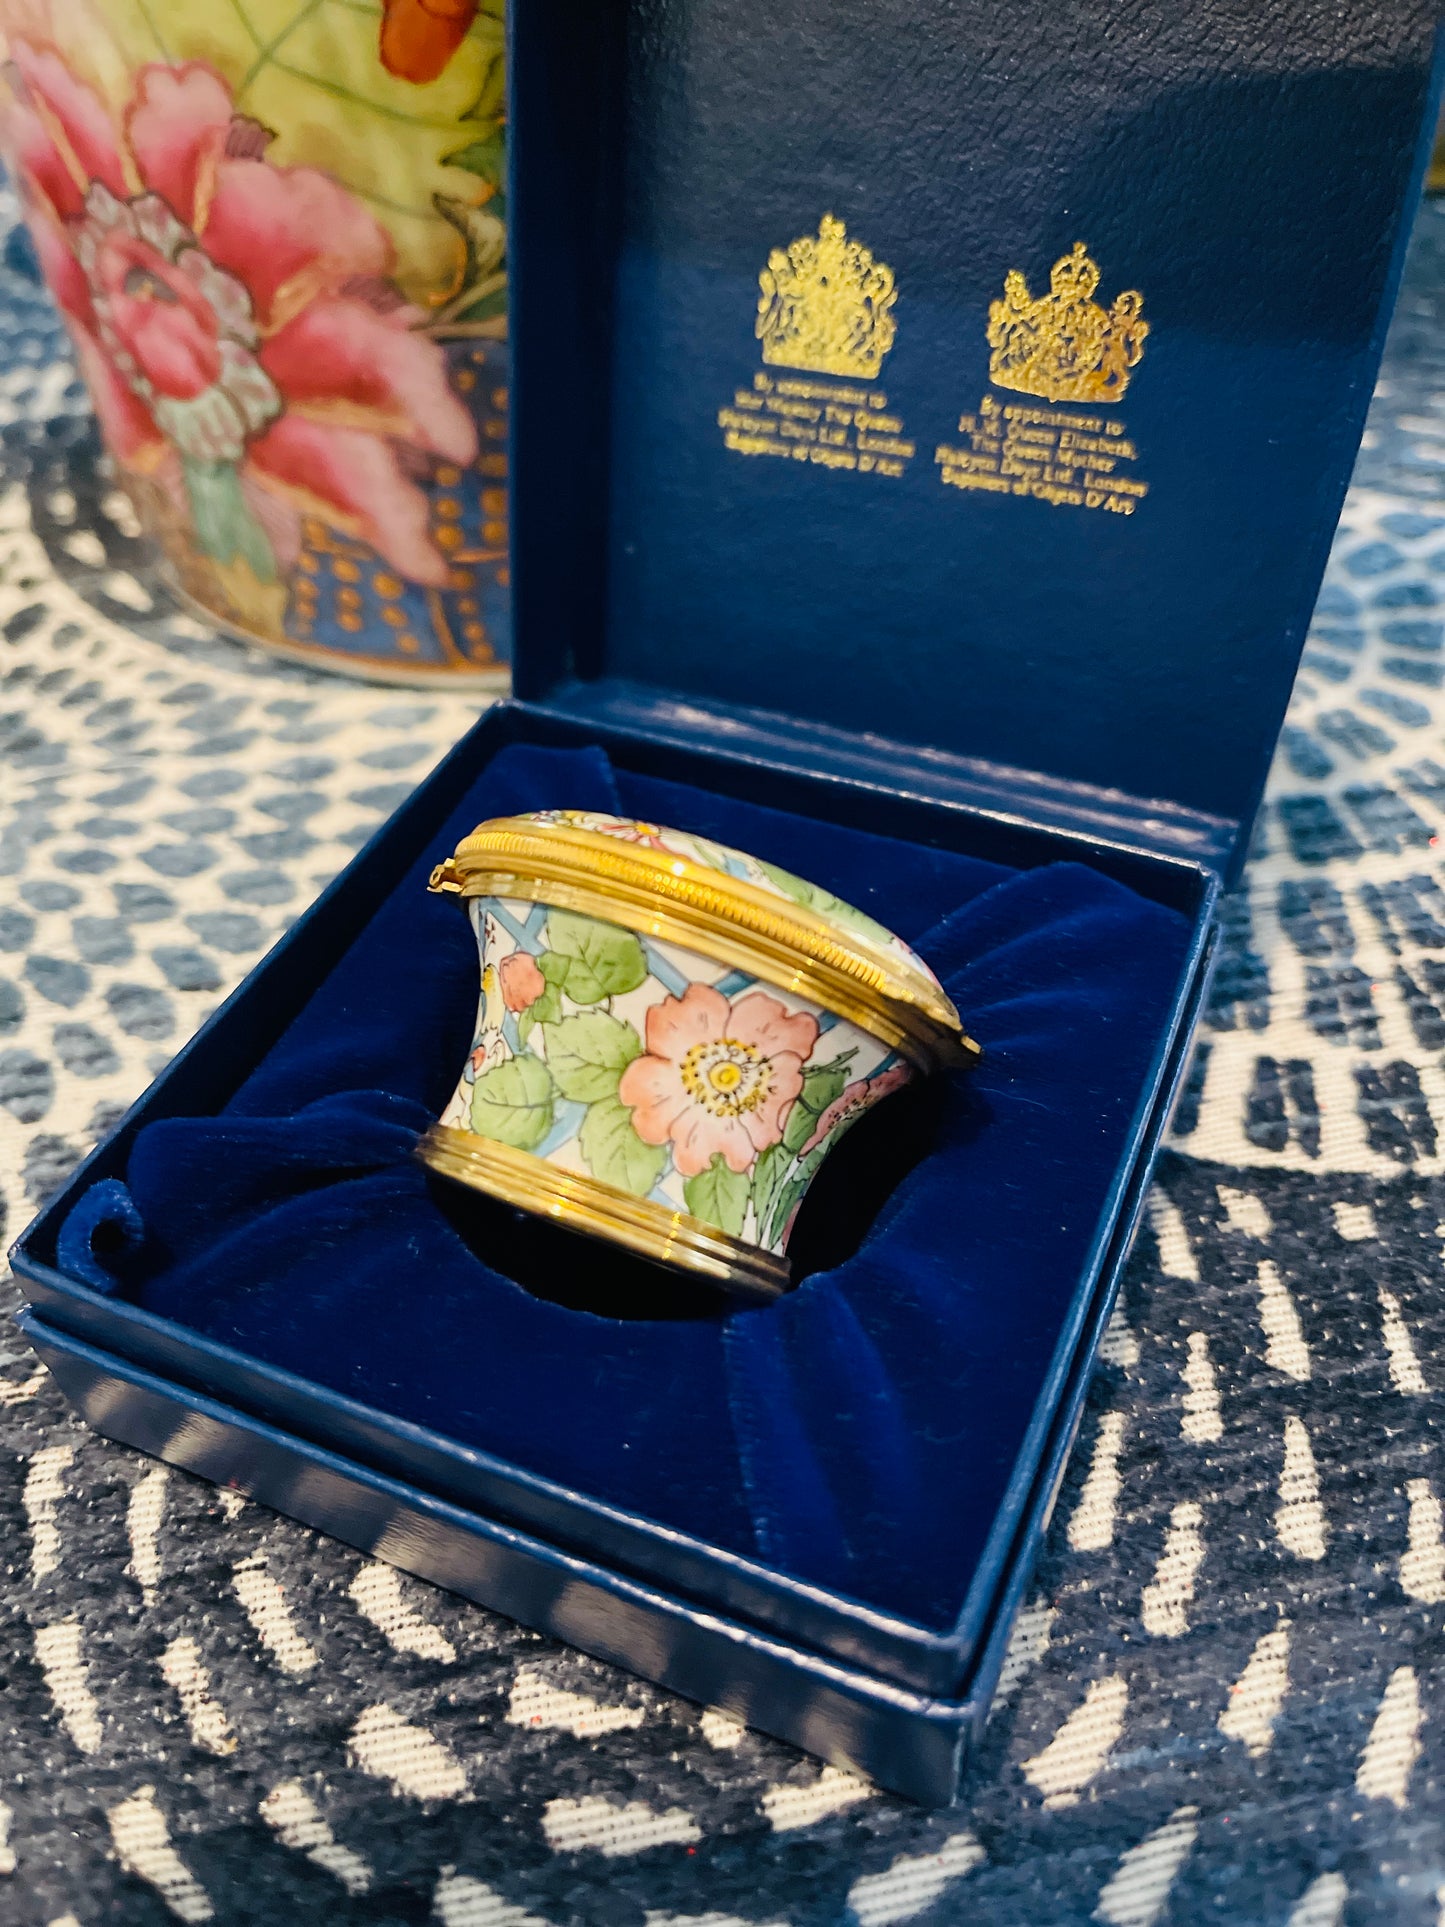 Vintage Halcyon Days Enamel Box with Pink and Yellow Flowers Draped on a Blue Trellis, Made in England